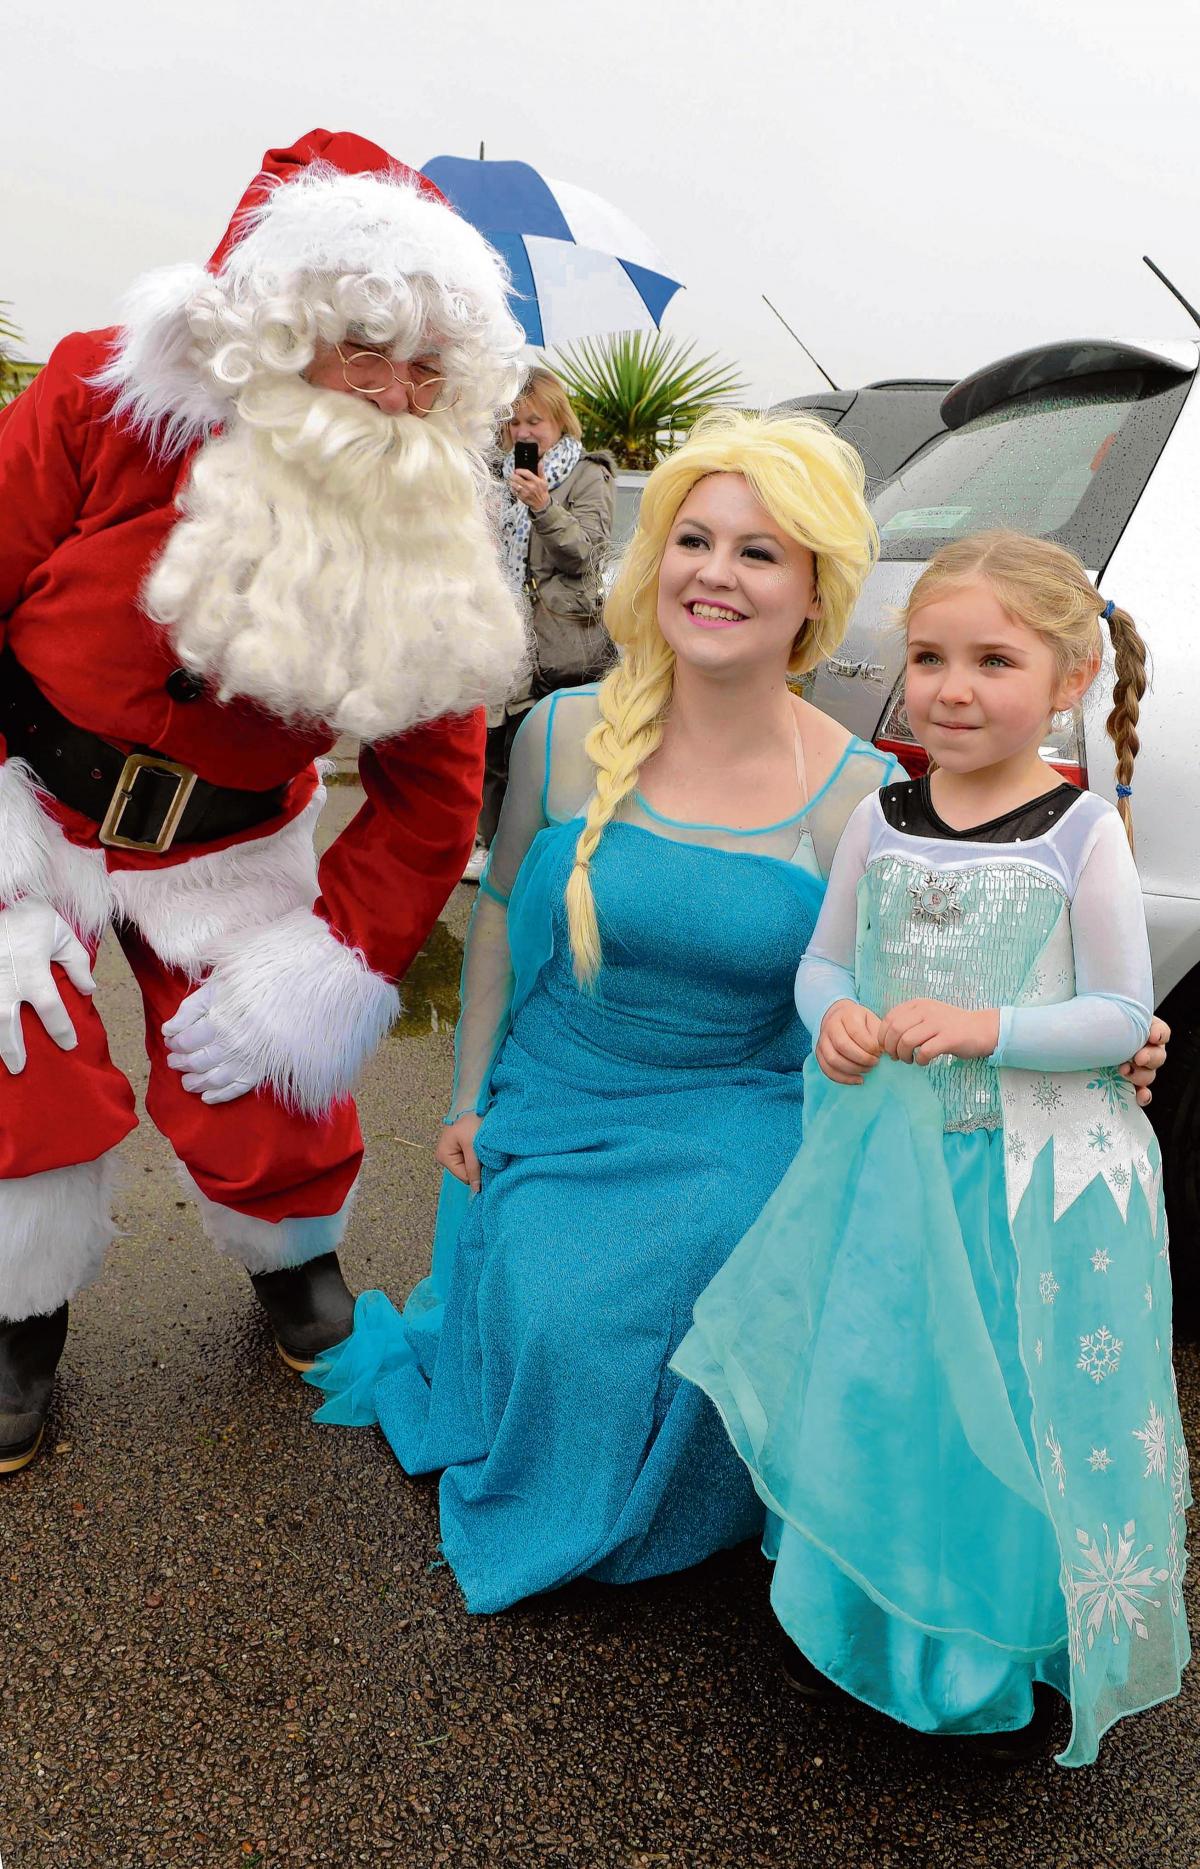 Santa, his reindeer and Elsa from the hit Disney film Frozen arrived in Lawford to waiting crowds at Hearts Delight Garden Centre.